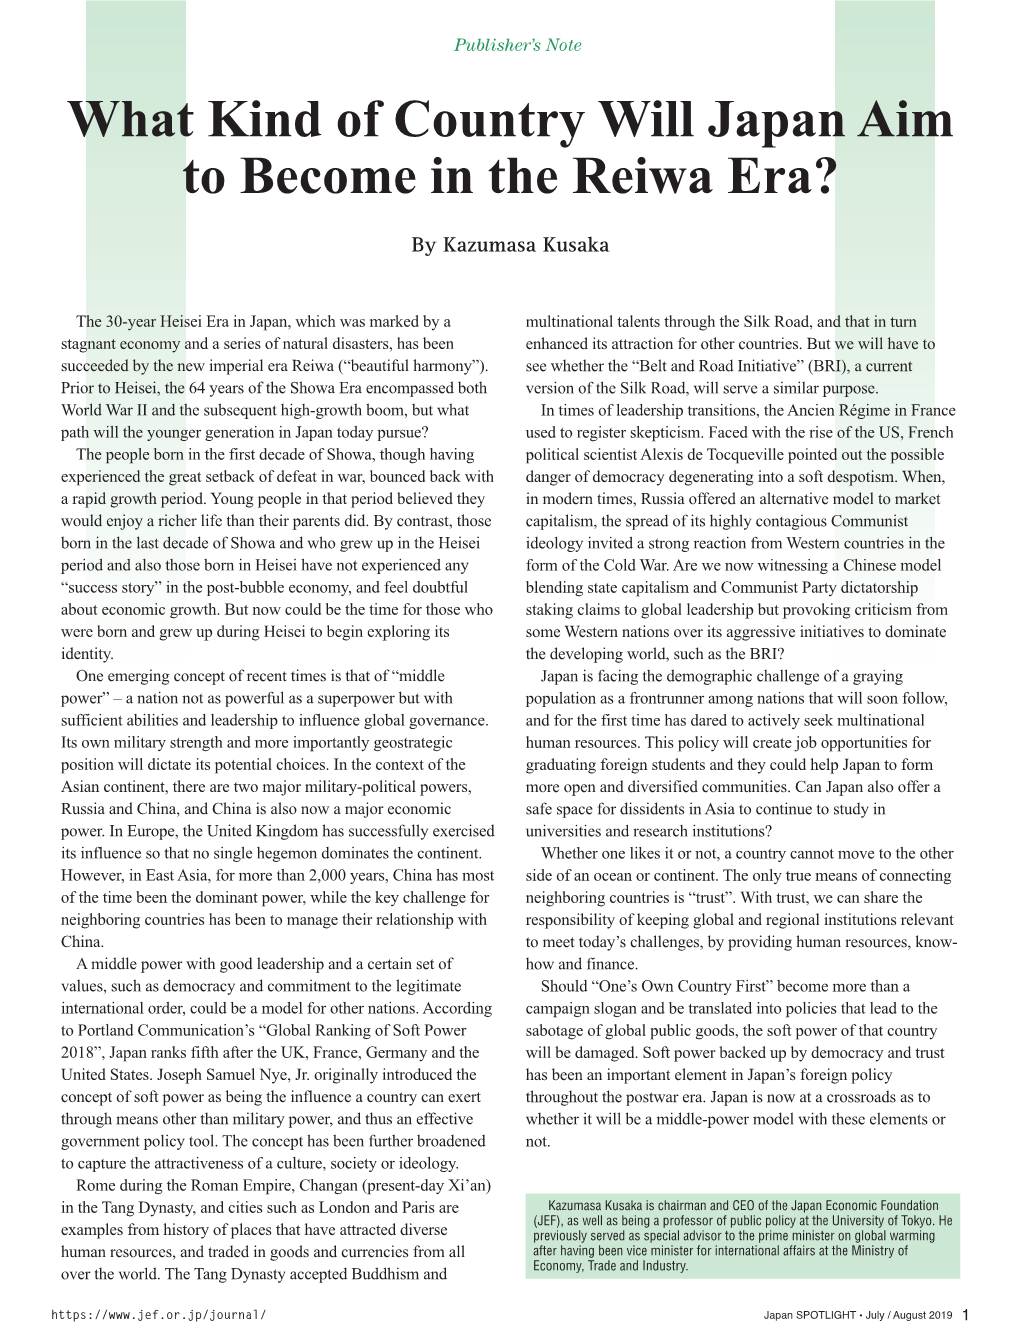 What Kind of Country Will Japan Aim to Become in the Reiwa Era?